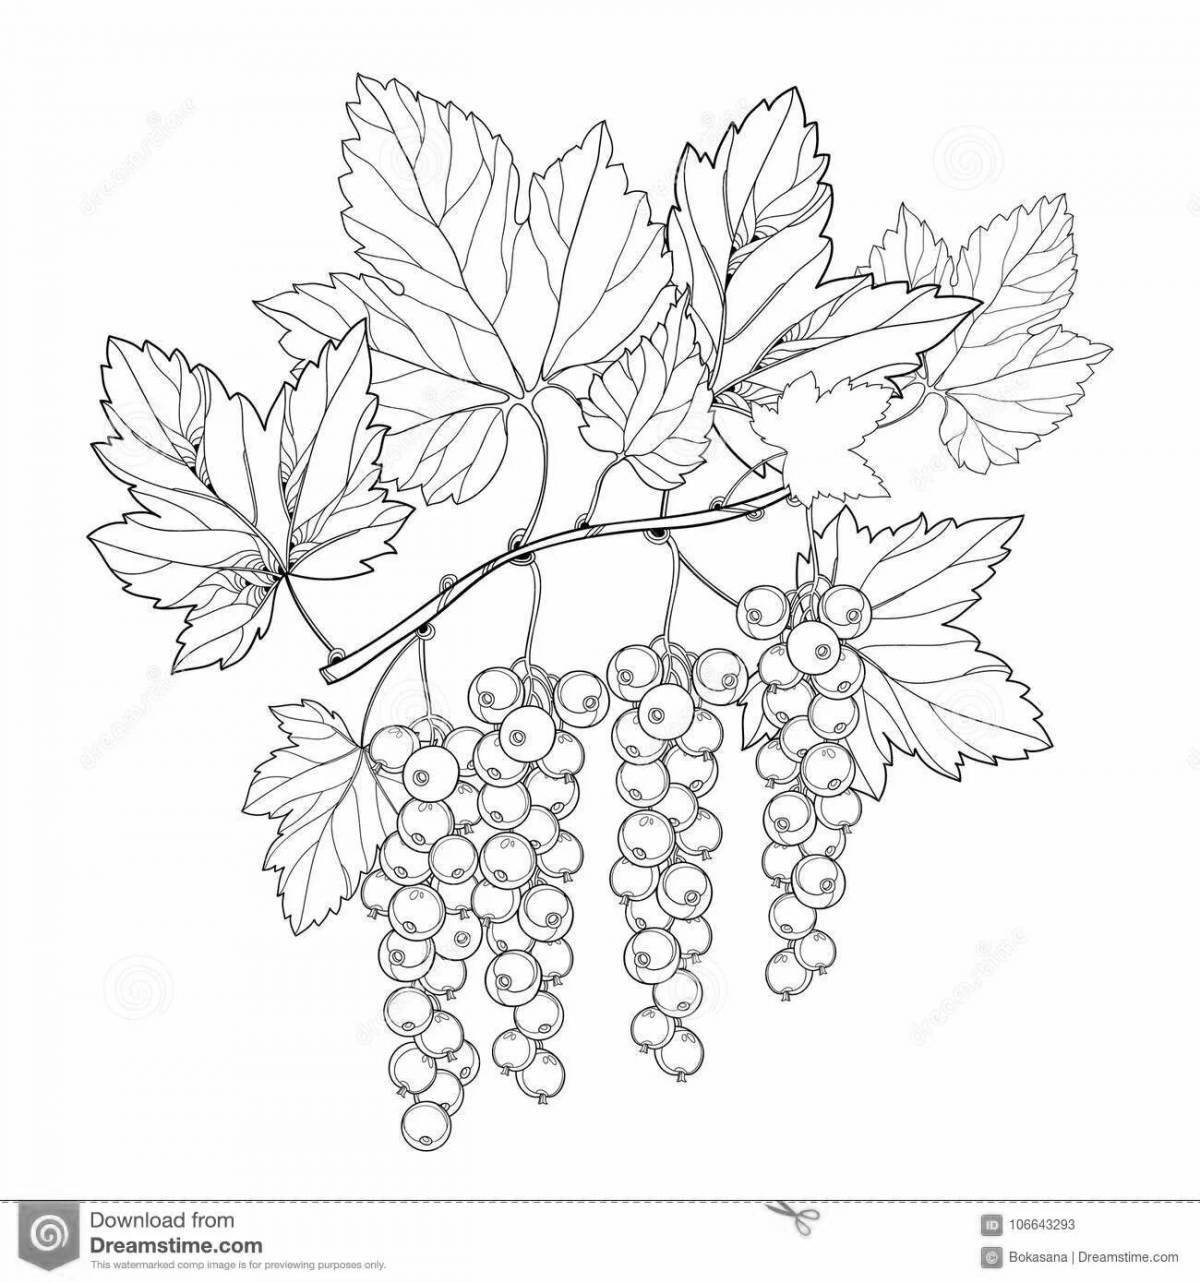 Exciting currant coloring book for babies